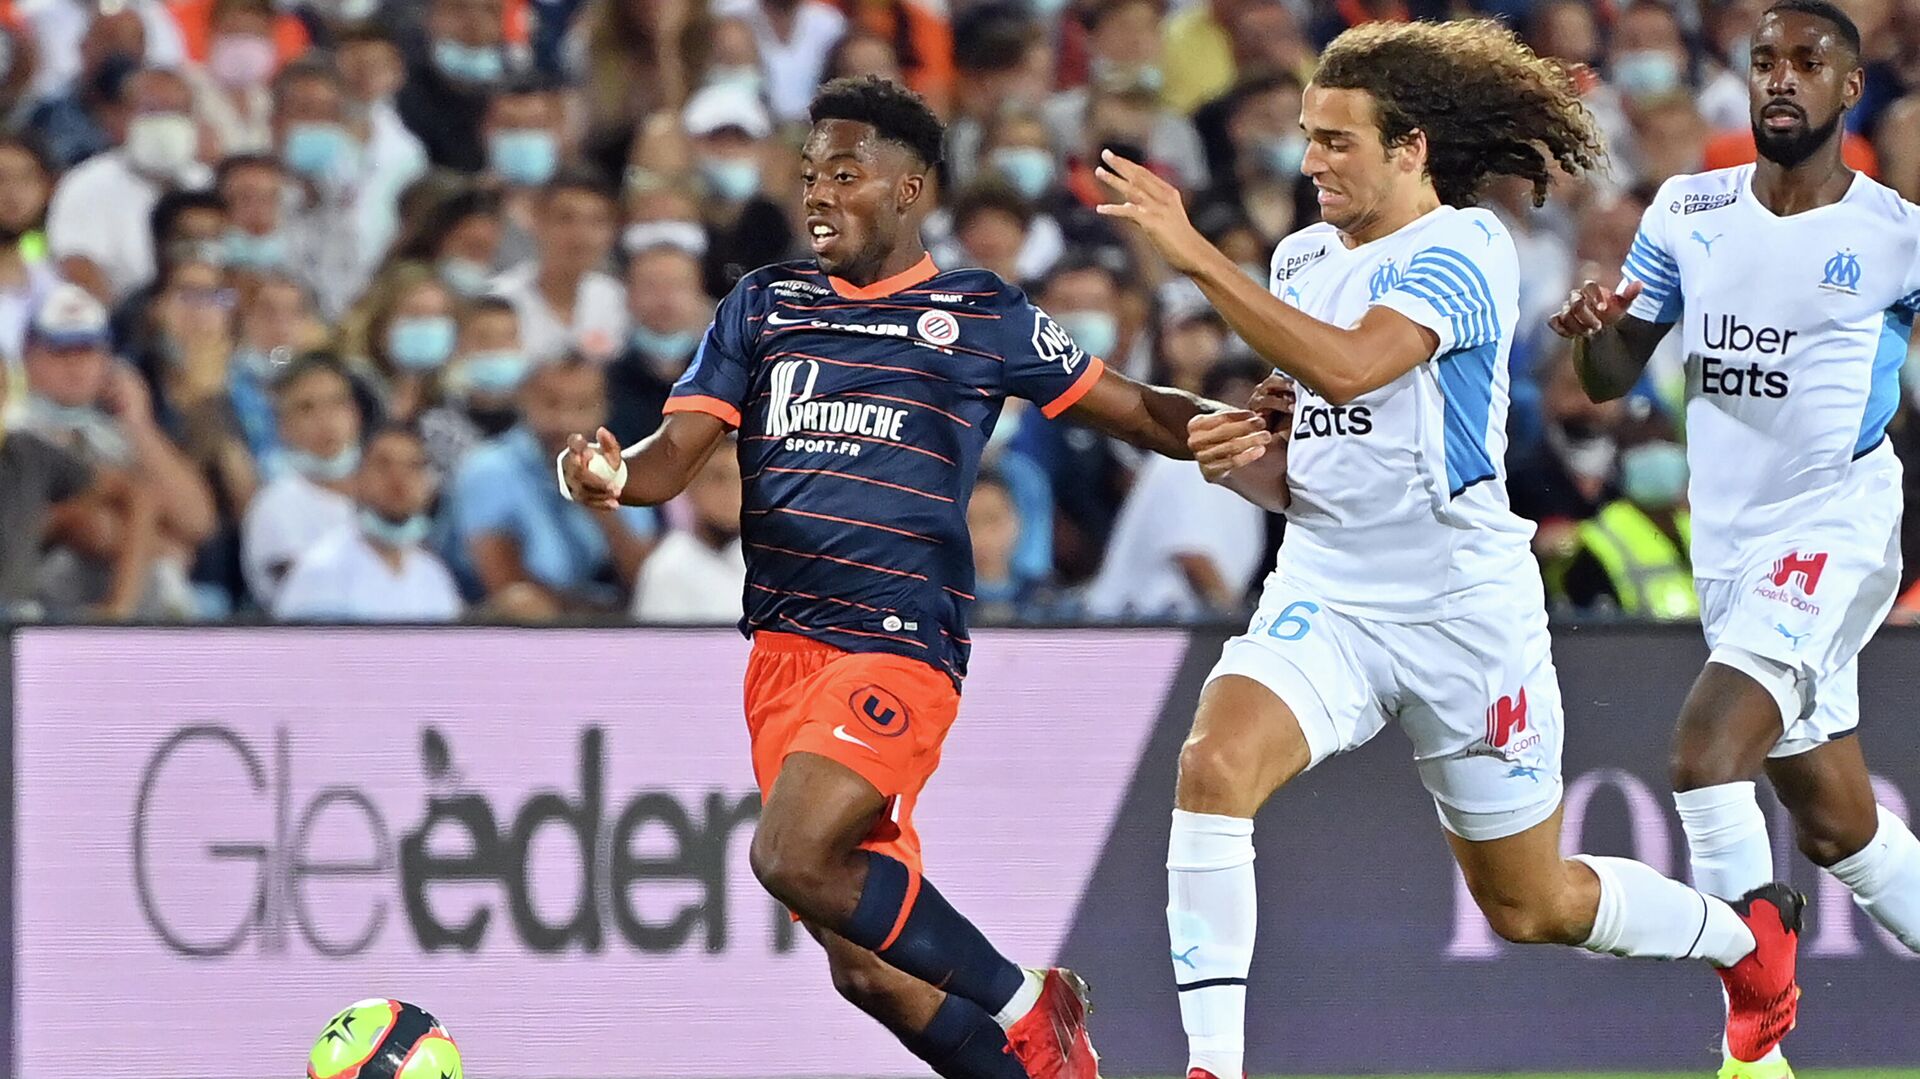 Montpellier's French forward Elye Wahi (L) fights for the ball with Marseille's French defender Matteo Guendouzi (R) during the French L1 football match between Montpellier and Marseille at the Mosson stadium in Montpellier, southern France on August 8, 2021. (Photo by Pascal GUYOT / AFP) - РИА Новости, 1920, 09.08.2021